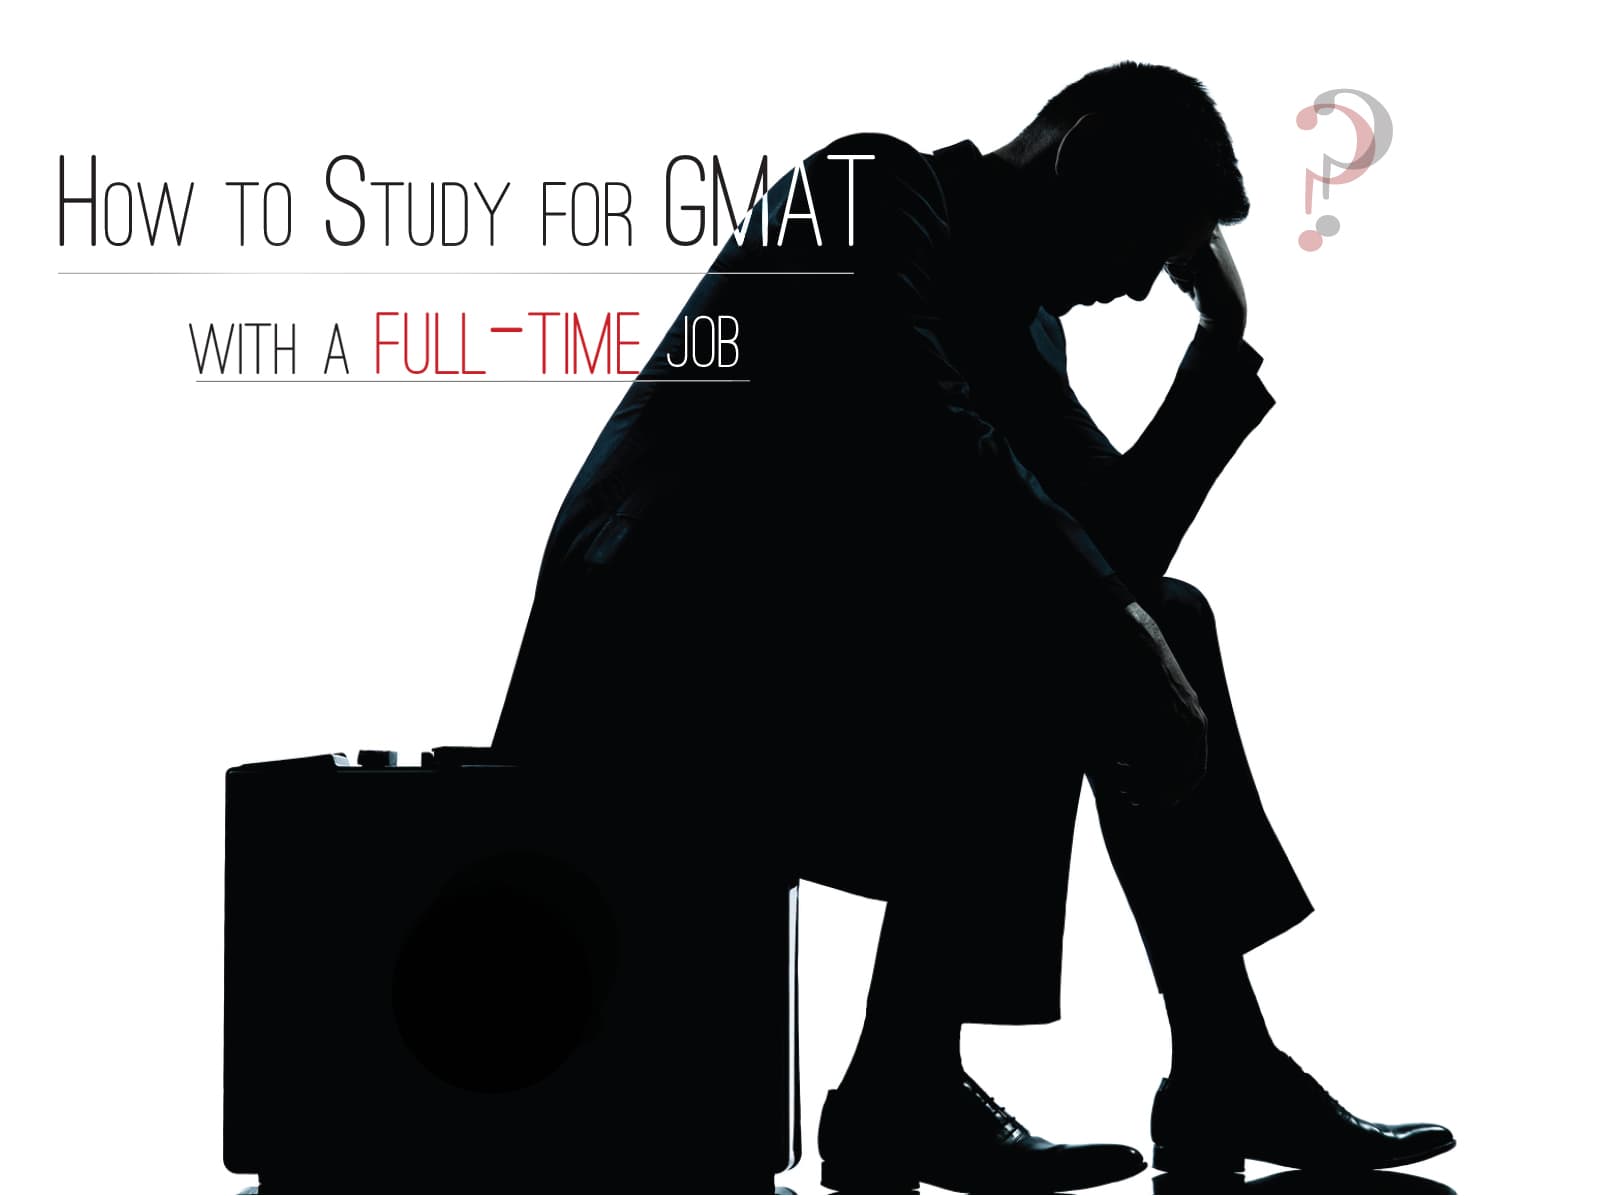 How to Study for GMAT with a Full-Time Job